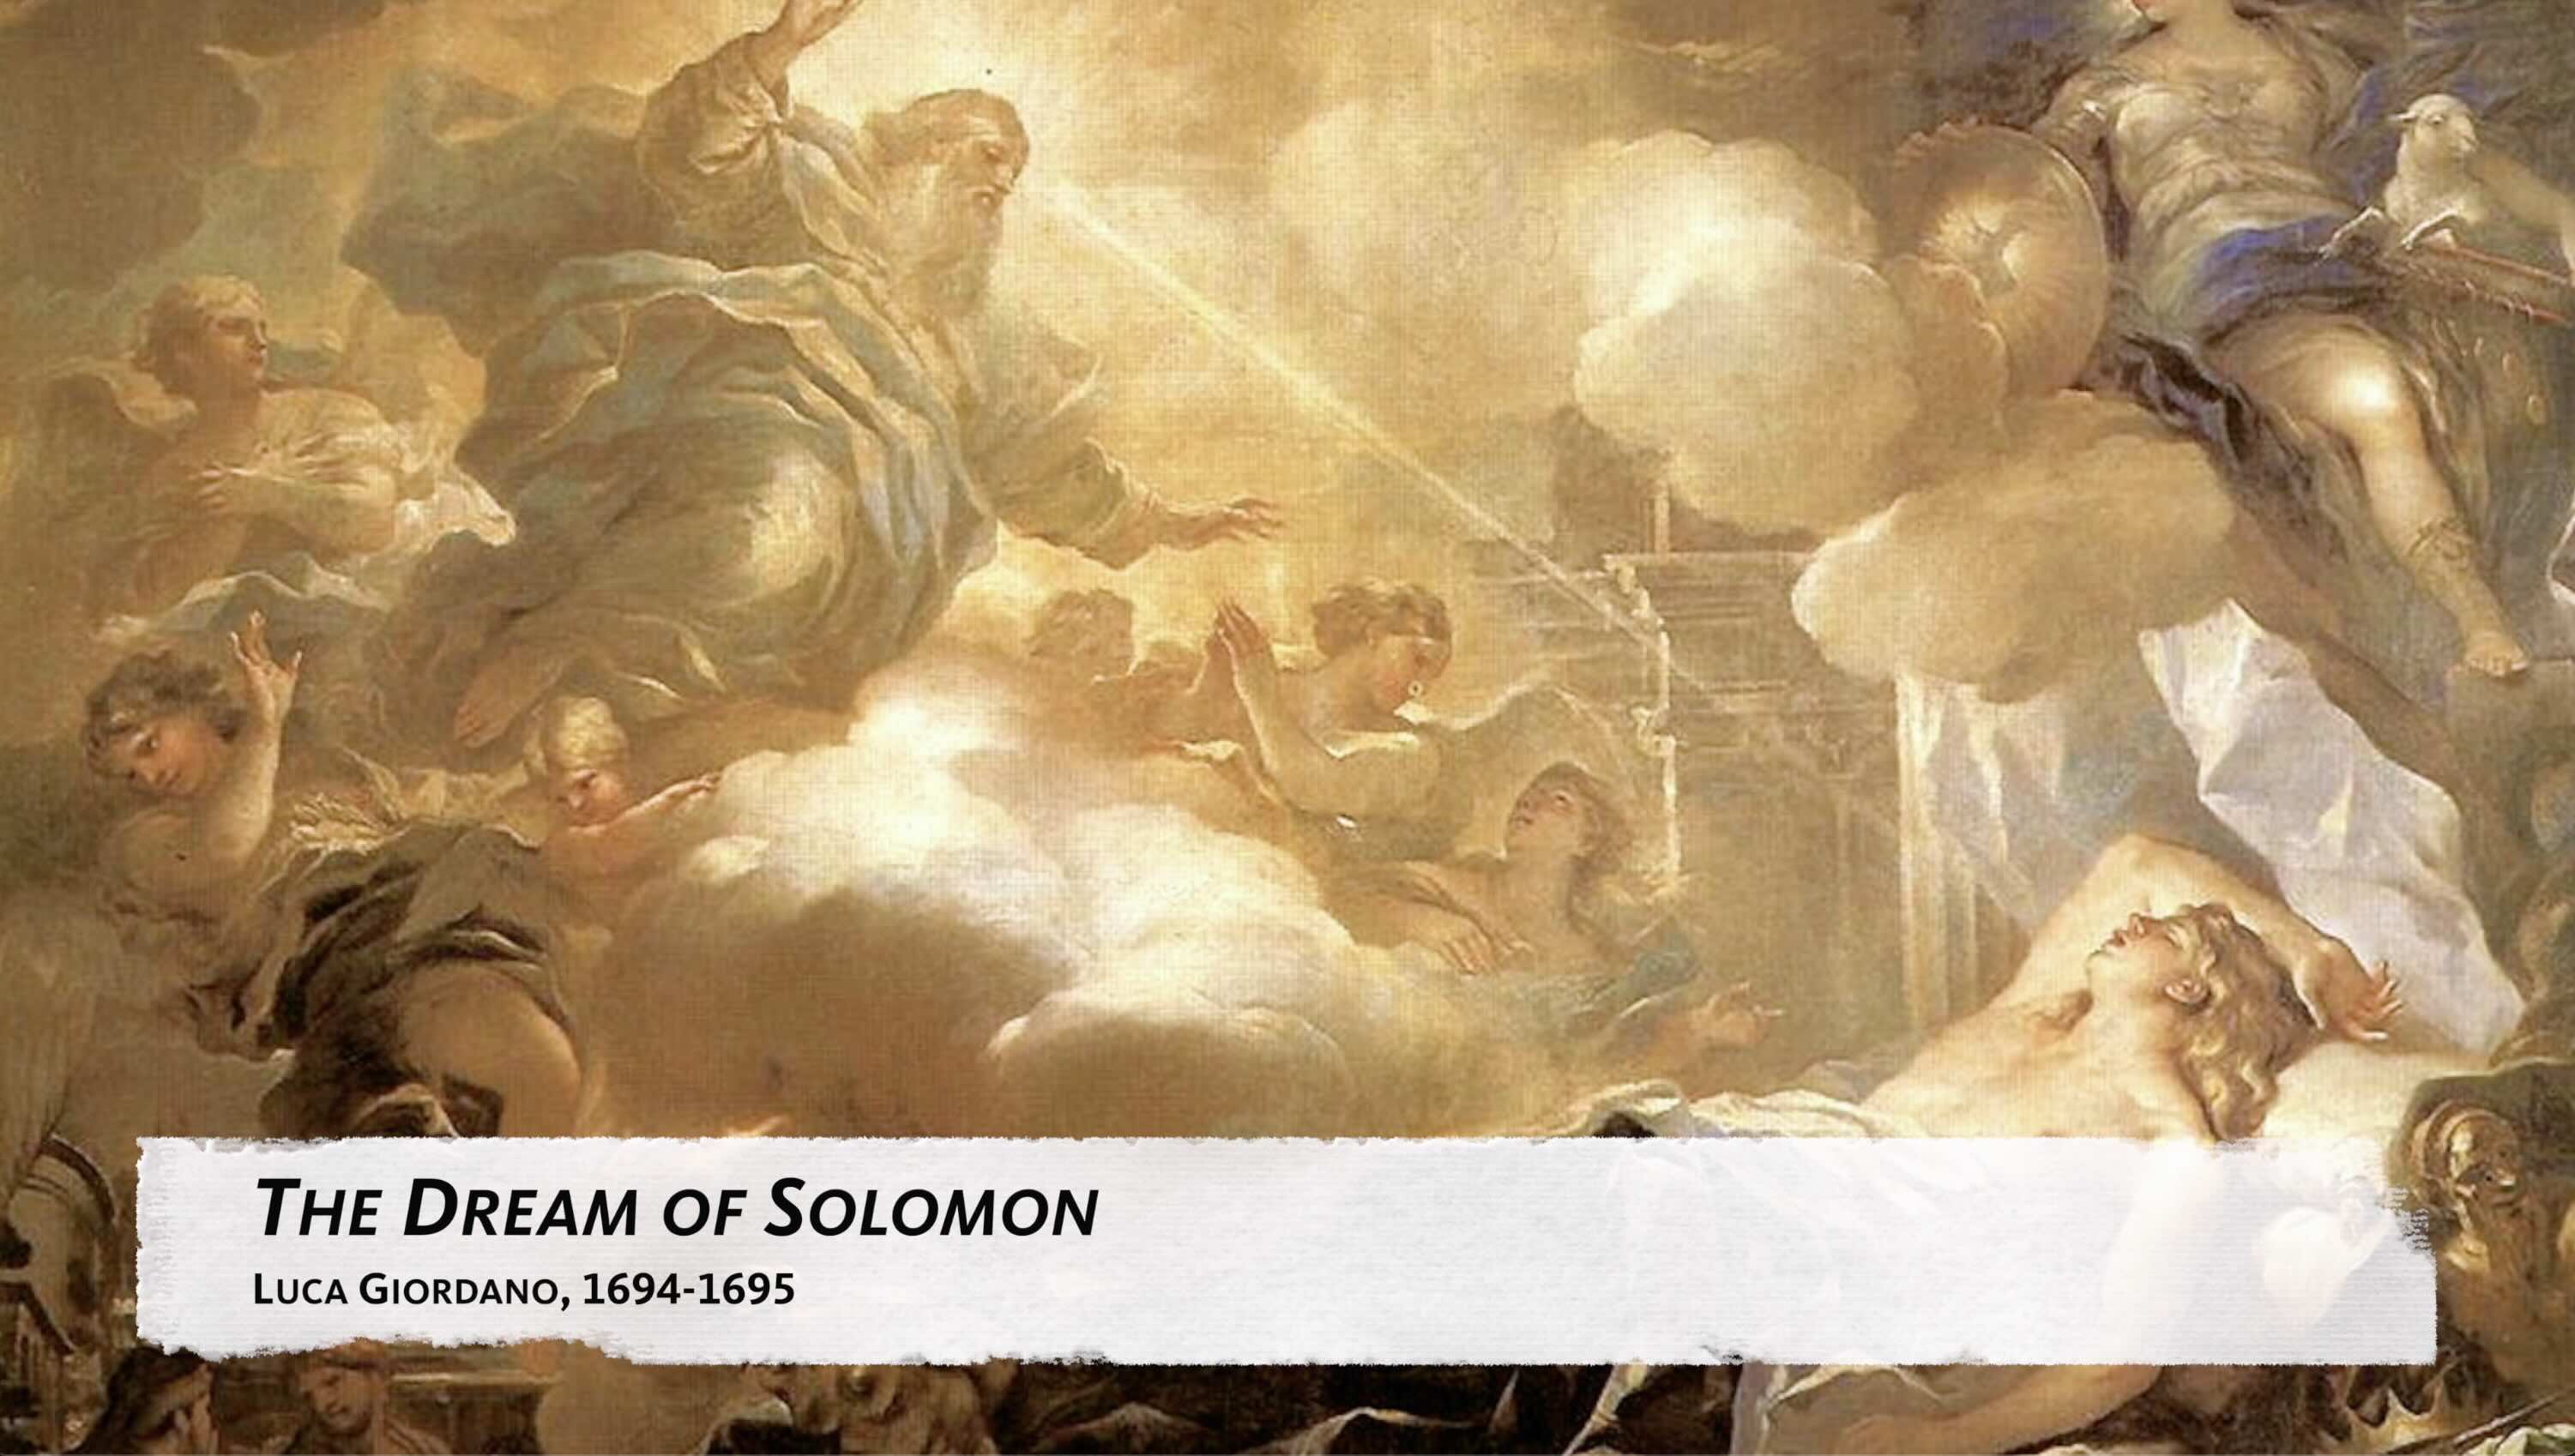 The Dream of Solomon Painting Image